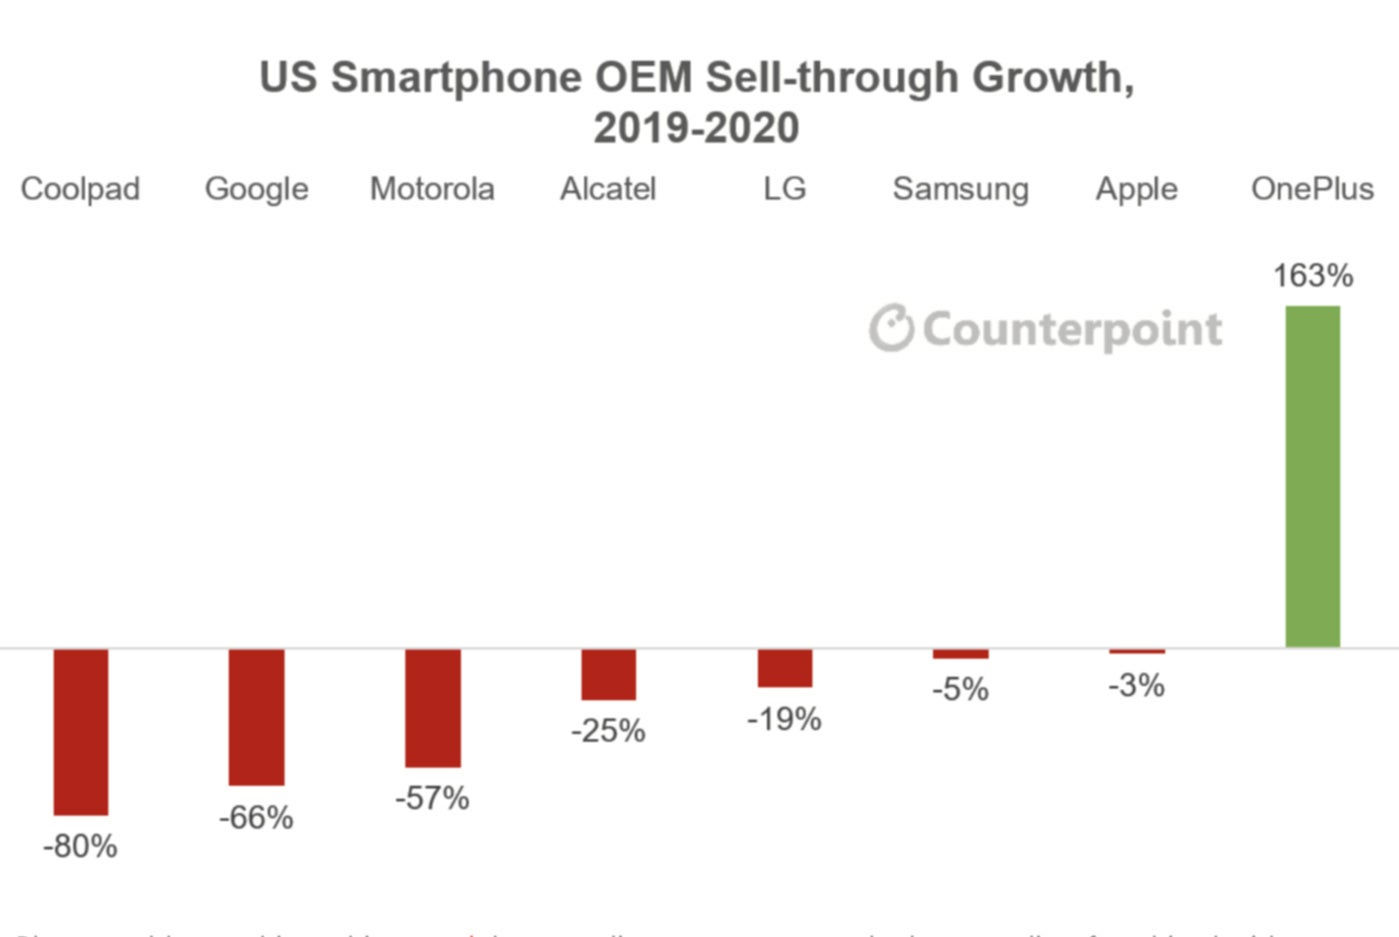 OnePlus was the only brand that grew in the US last year